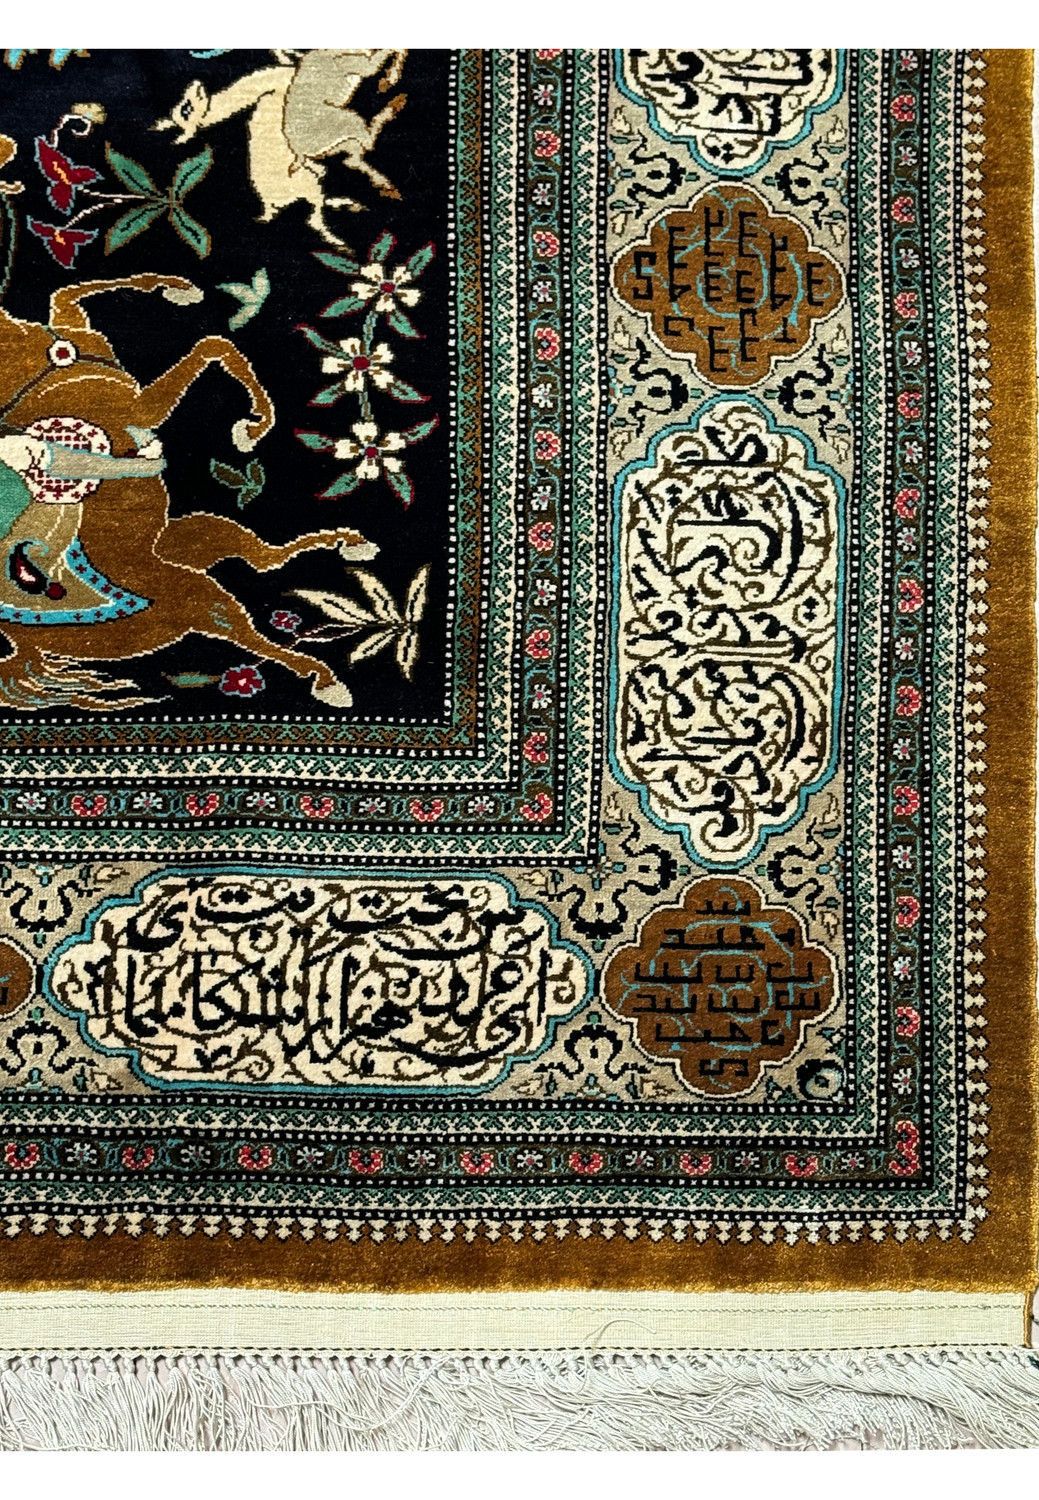 Full view of 4'6" x 7' Persian Qum Silk Hunting Rug with detailed border and central hunting scene, showcasing hand-knotted craftsmanship